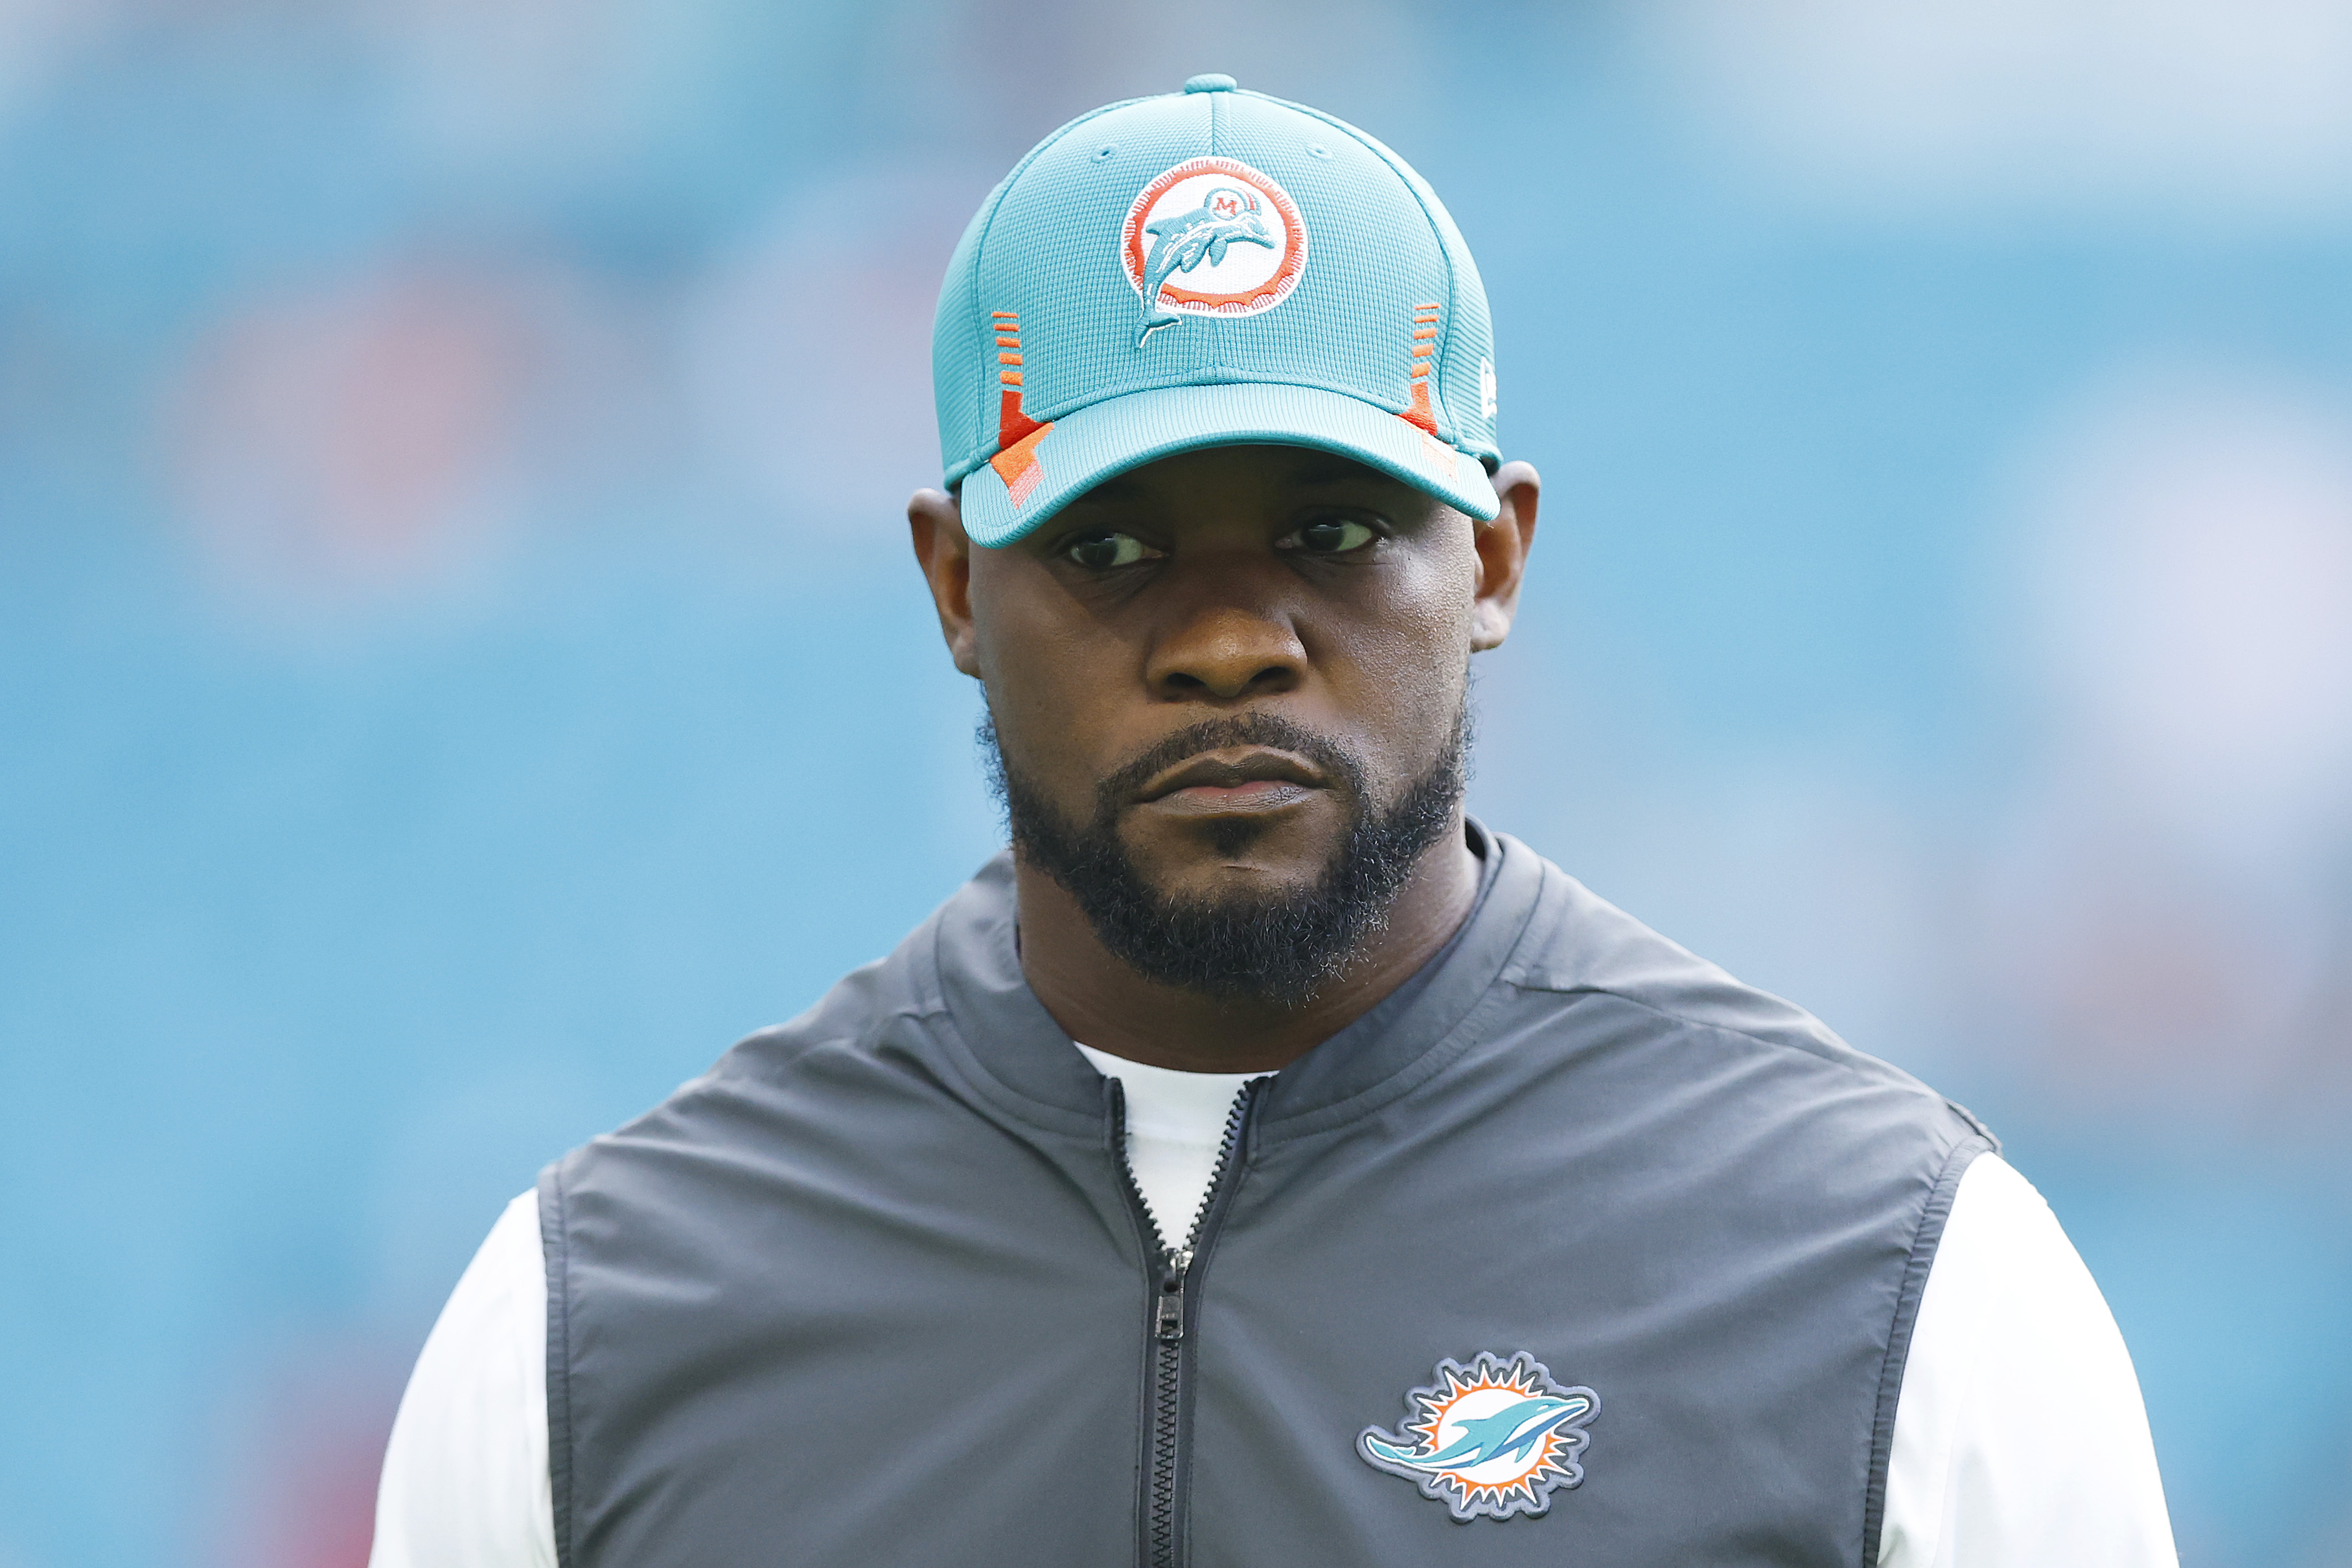 Former Miami Dolphins head coach Brian Flores files a lawsuit against the NFL and three other NFL teams for racism during the hiring process.